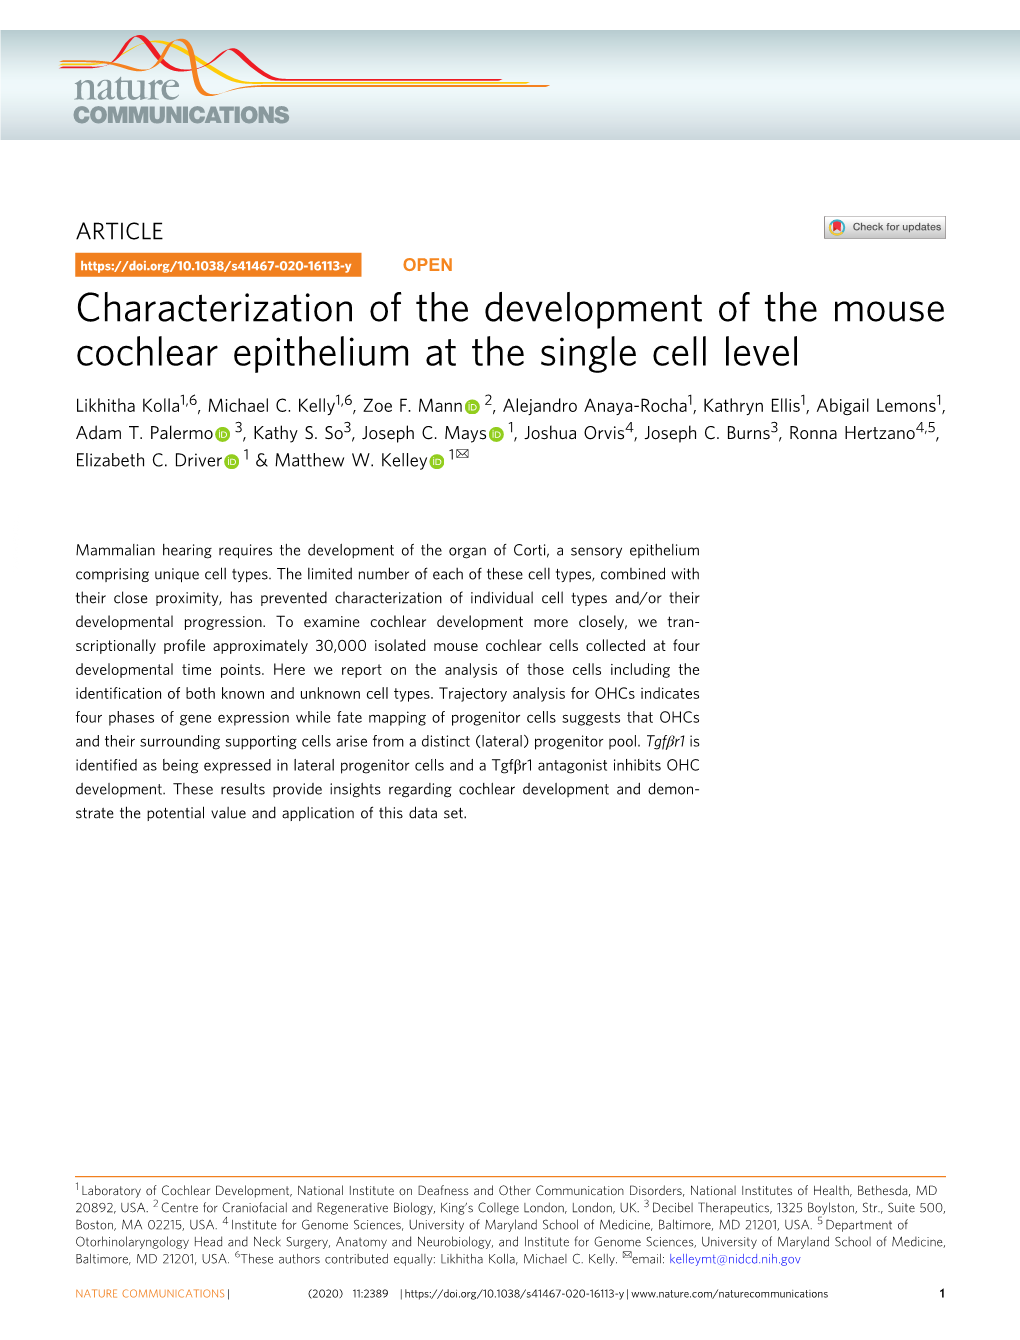 Characterization of the Development of the Mouse Cochlear Epithelium at the Single Cell Level